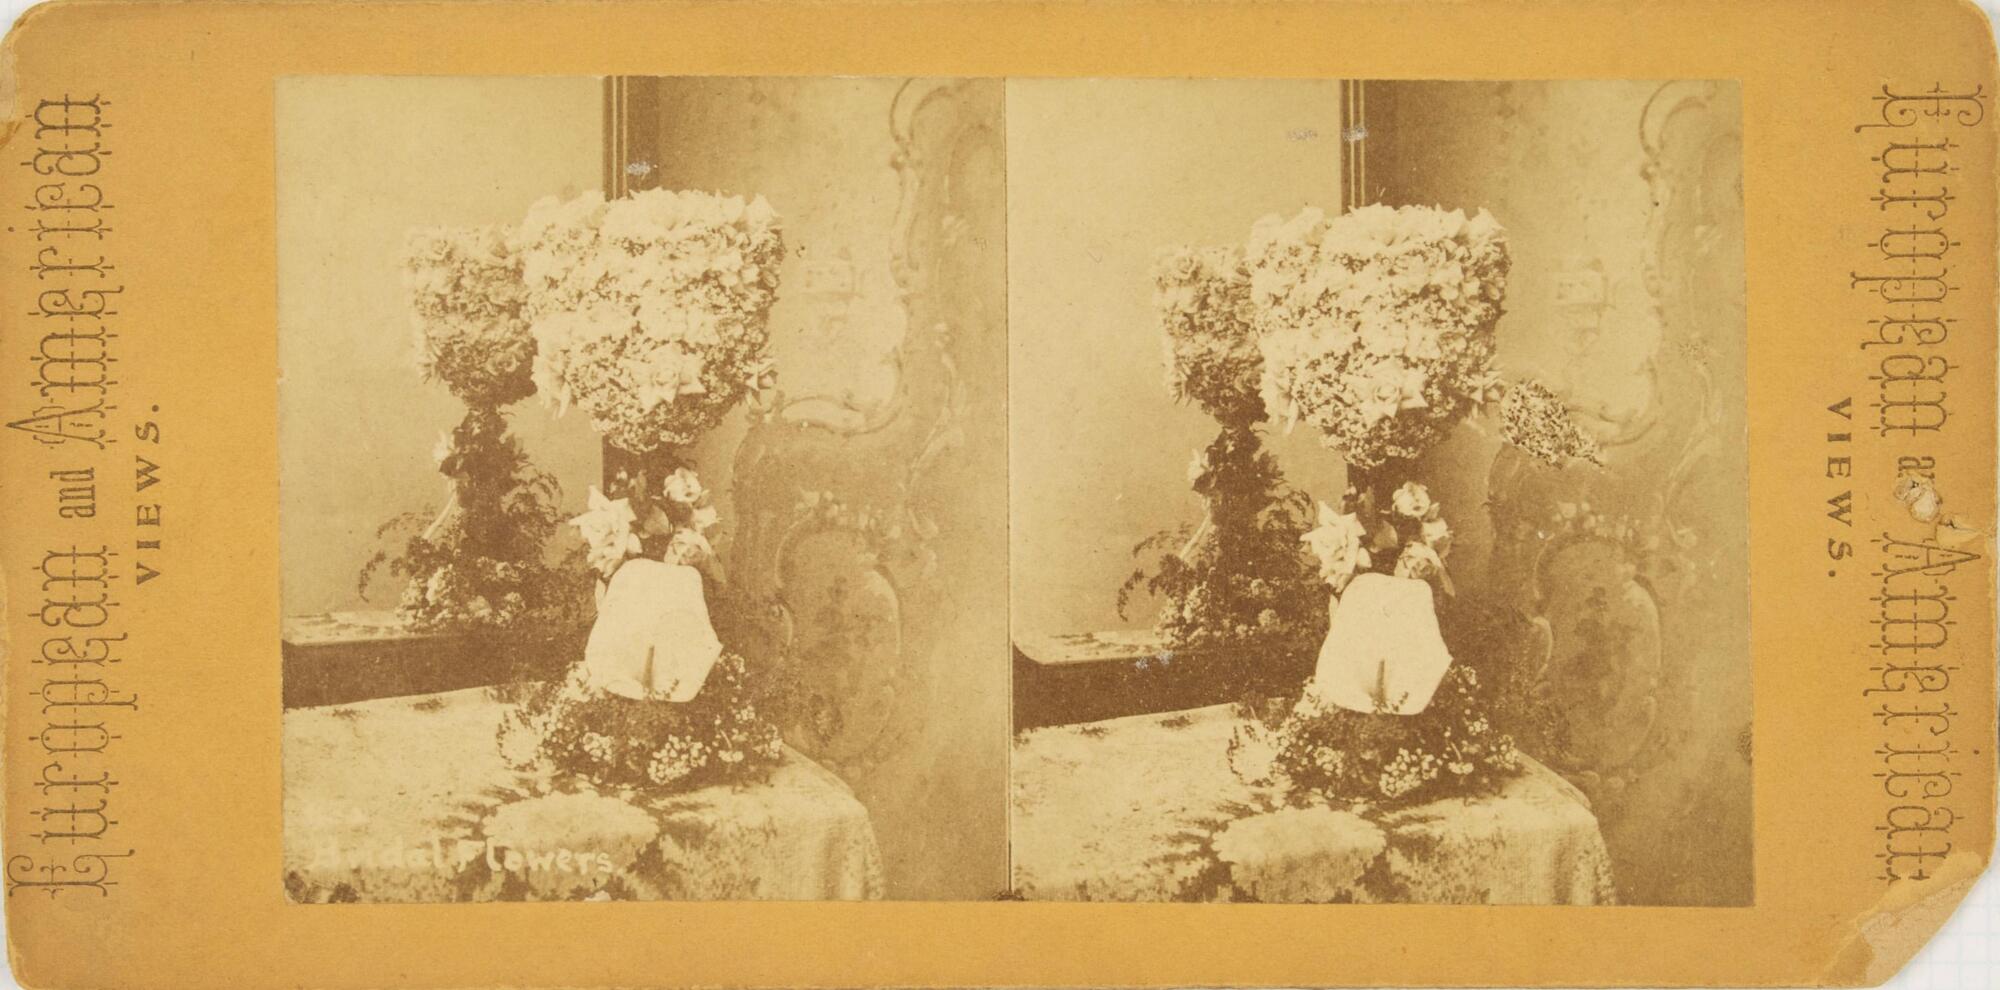 This black and white stereoscopic image features two images of a bundle of flowers that have a shapped top and flower base. It is on a table with a mirror behind it on the left. Sepia toned.